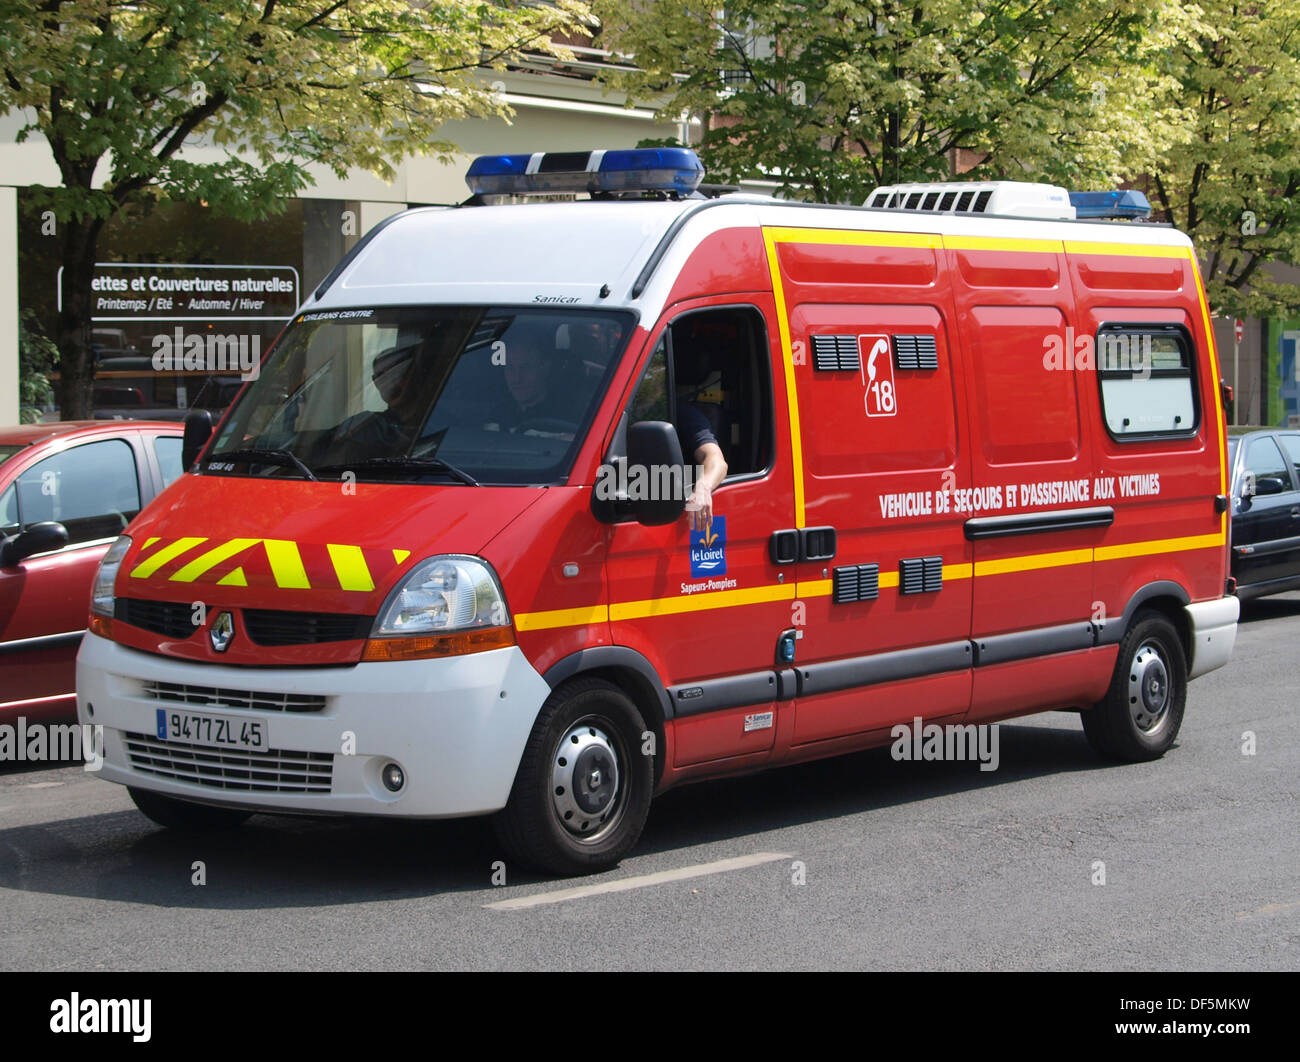 Fire dept - Ambulance Renault at Orleans p2 Stock Photo